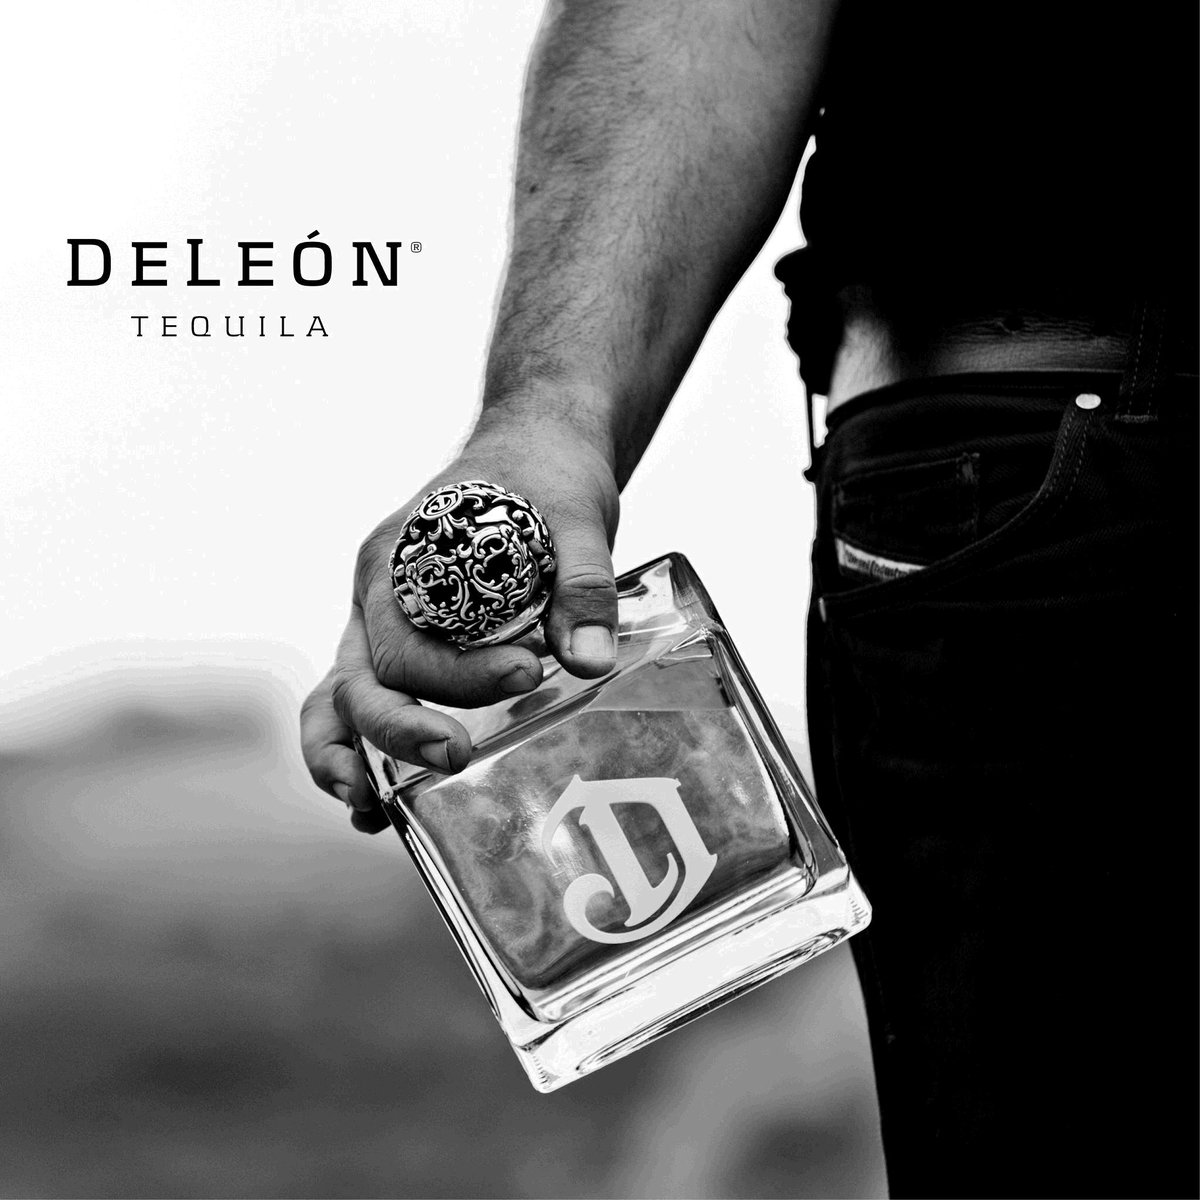 RT @DeLeonTequila: What sets #DeleonTequila apart is that our agave is hand selected at harvest for quality you can taste. https://t.co/igd…